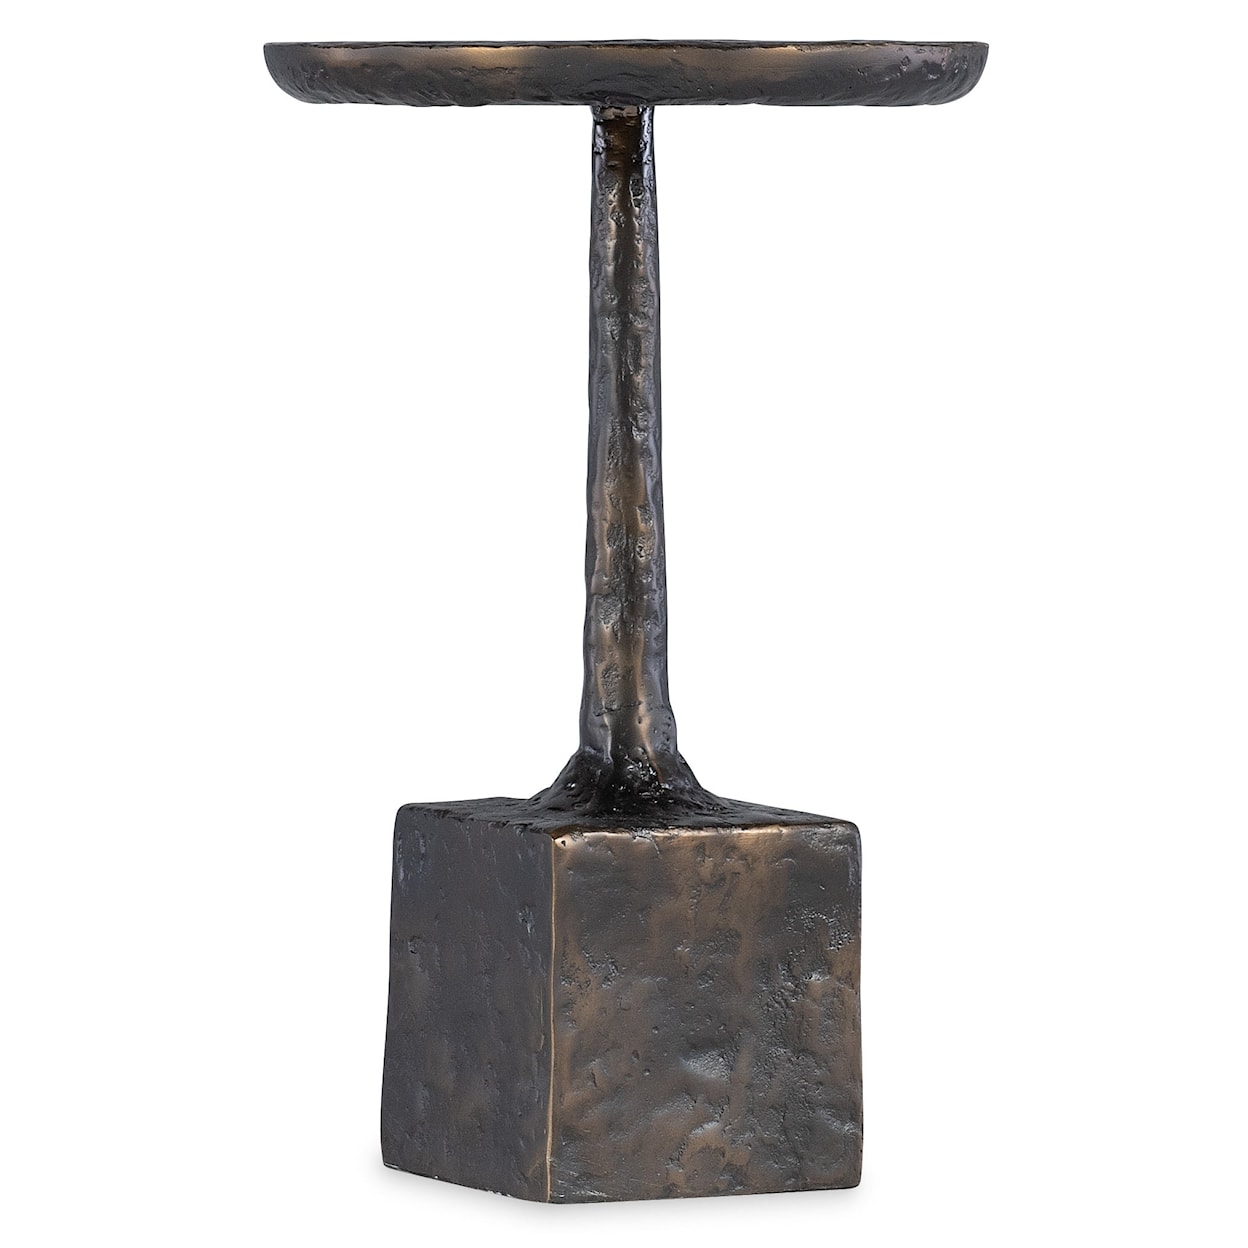 BOBO Intriguing Objects BOBO Intriguing Objects Hand-Hammered Bronze Side Table